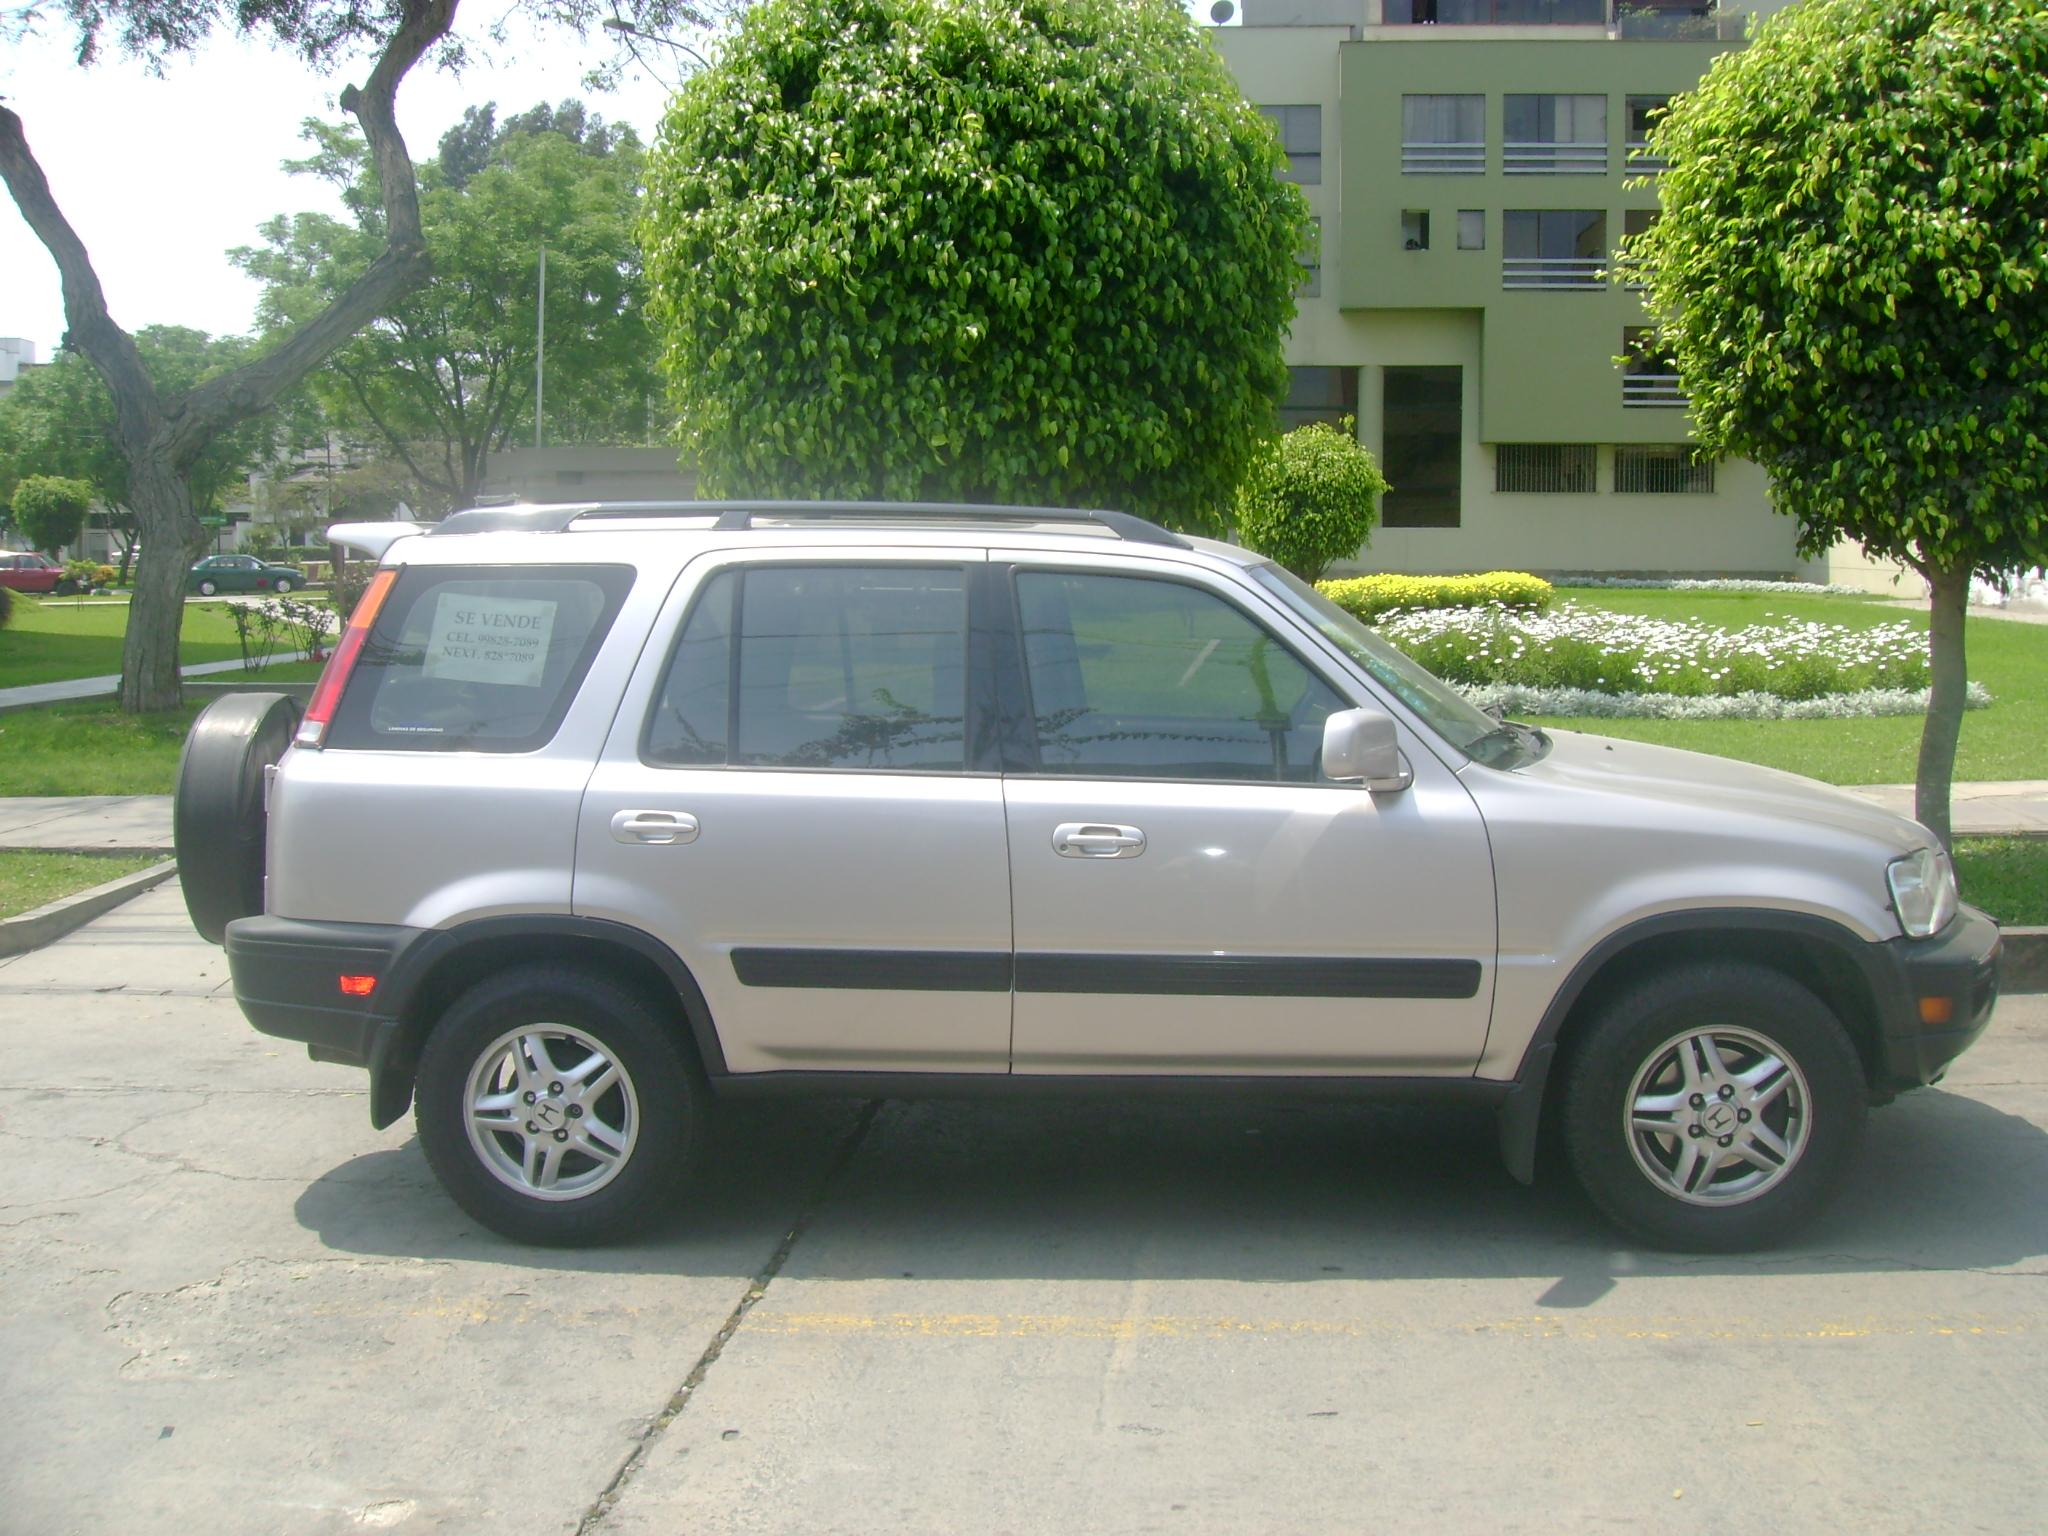 Honda CRV 1998 Review, Amazing Pictures and Images Look